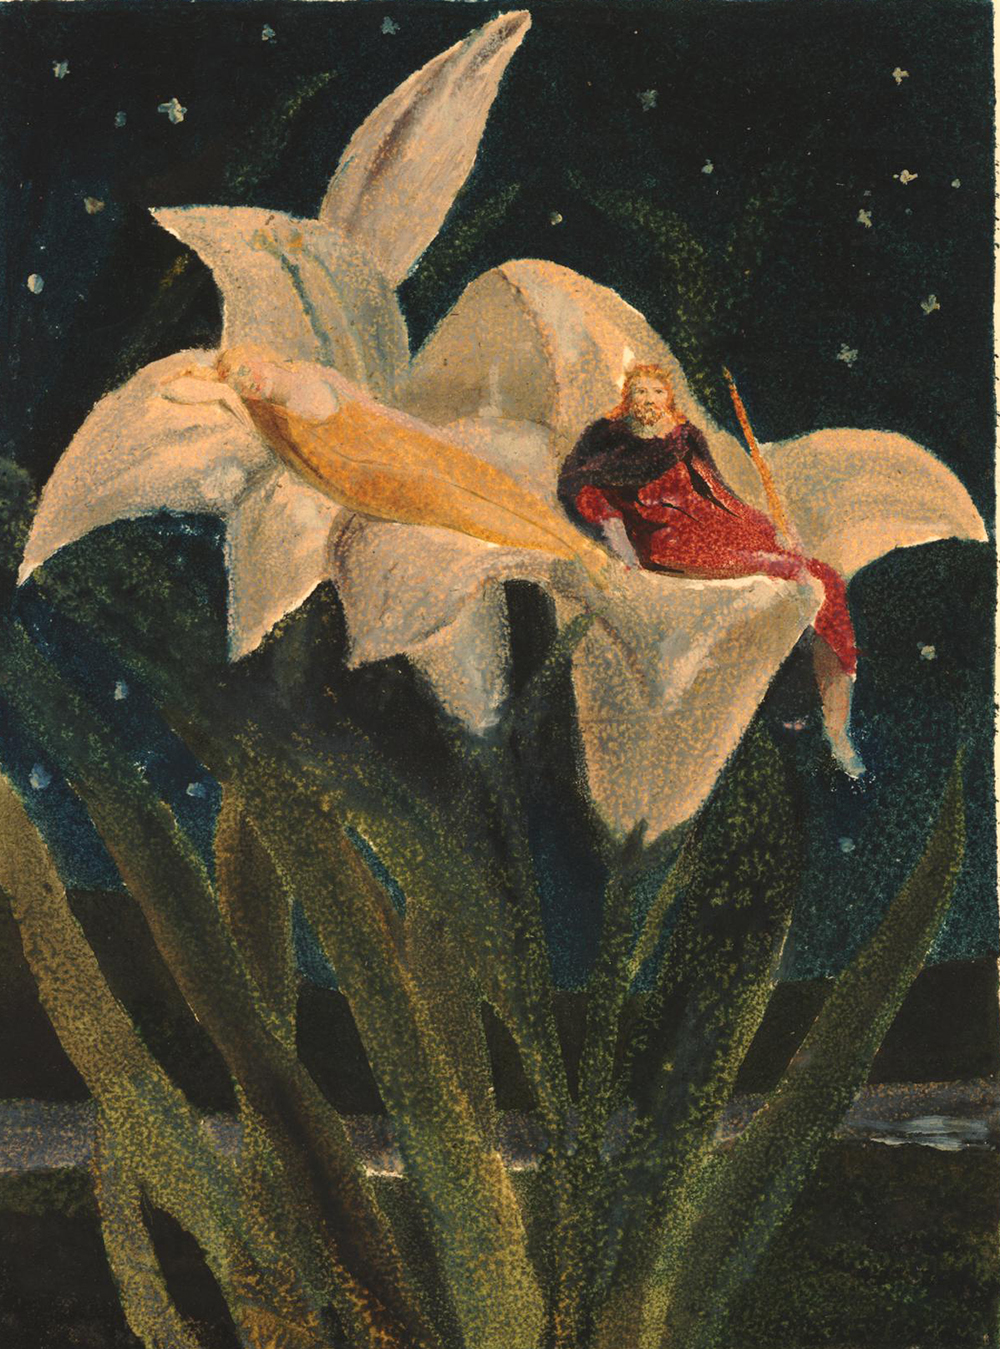 Print of a landscape with starry sky; in the foreground two lilies, on which repose the King and Queen of the fairies, by William Blake, 1795.